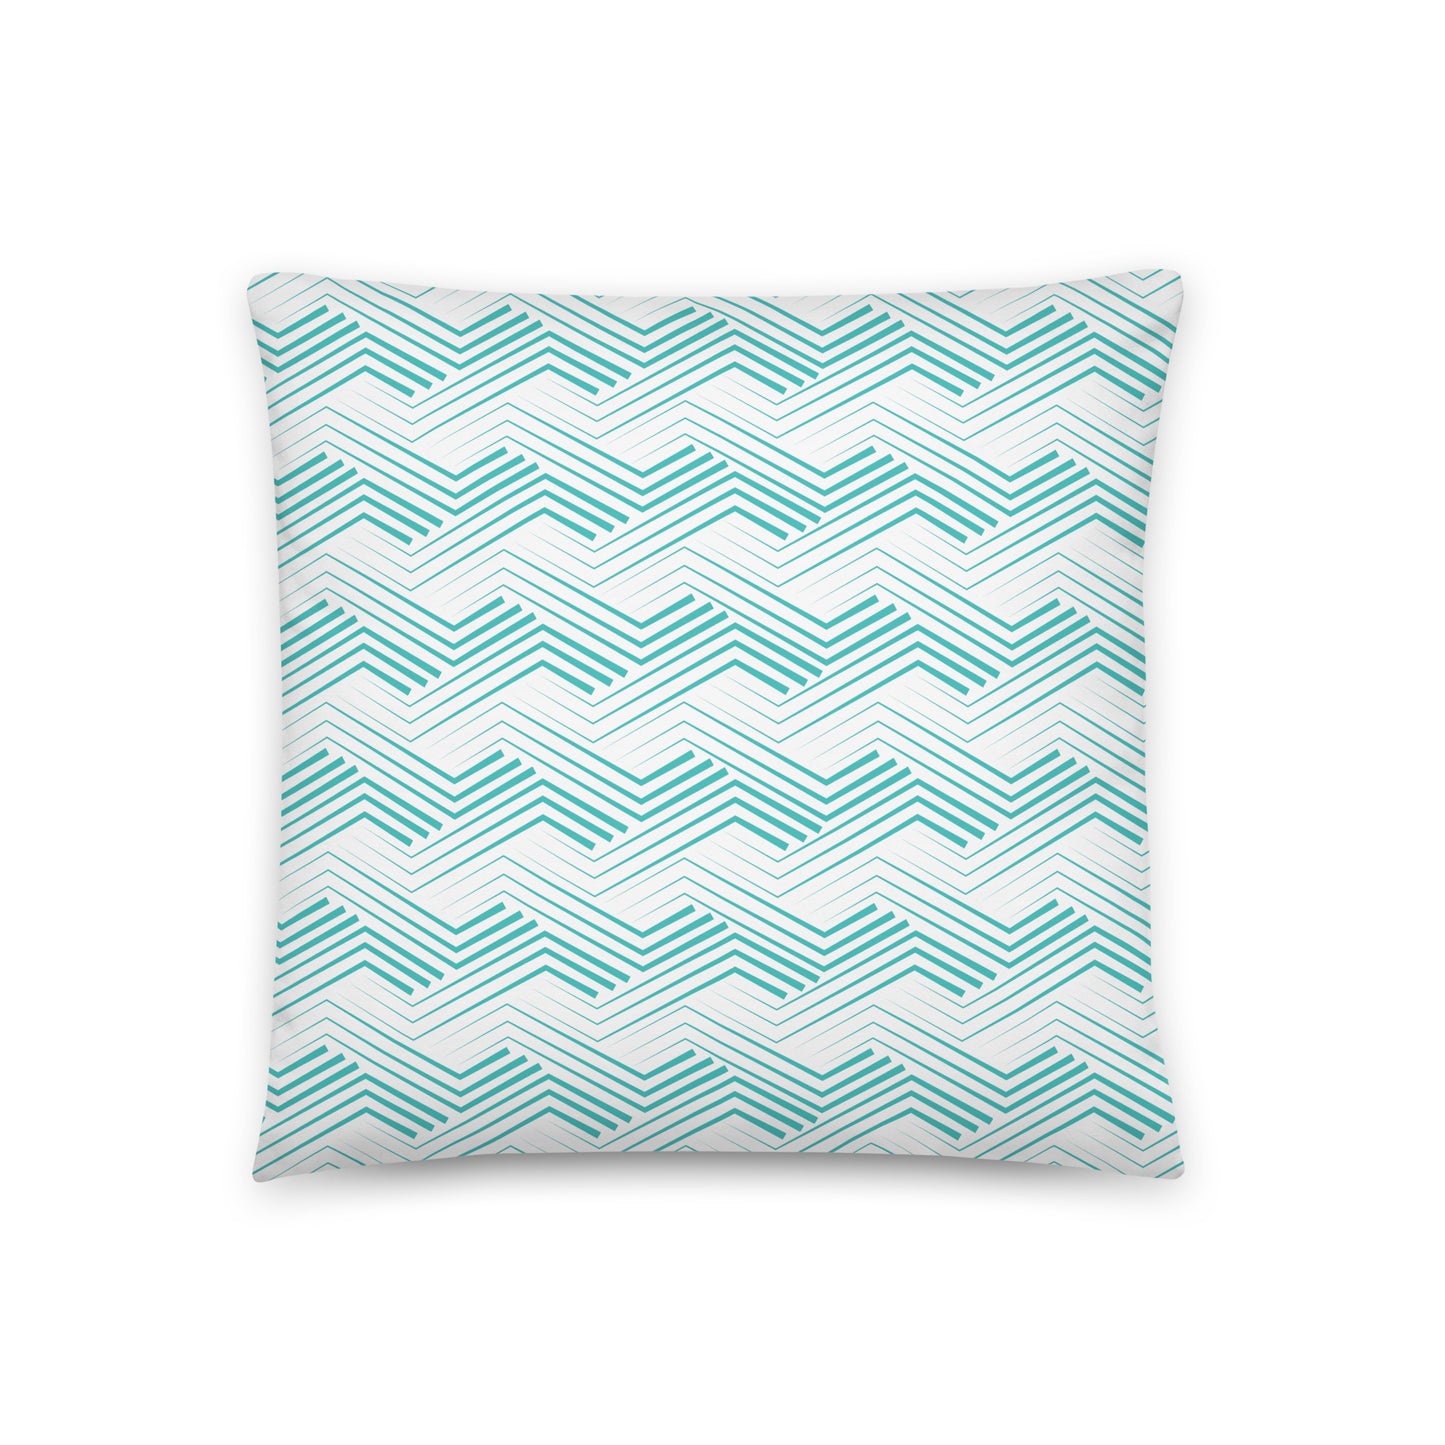 Blue Zigzag Pattern - Sustainably Made Pillows